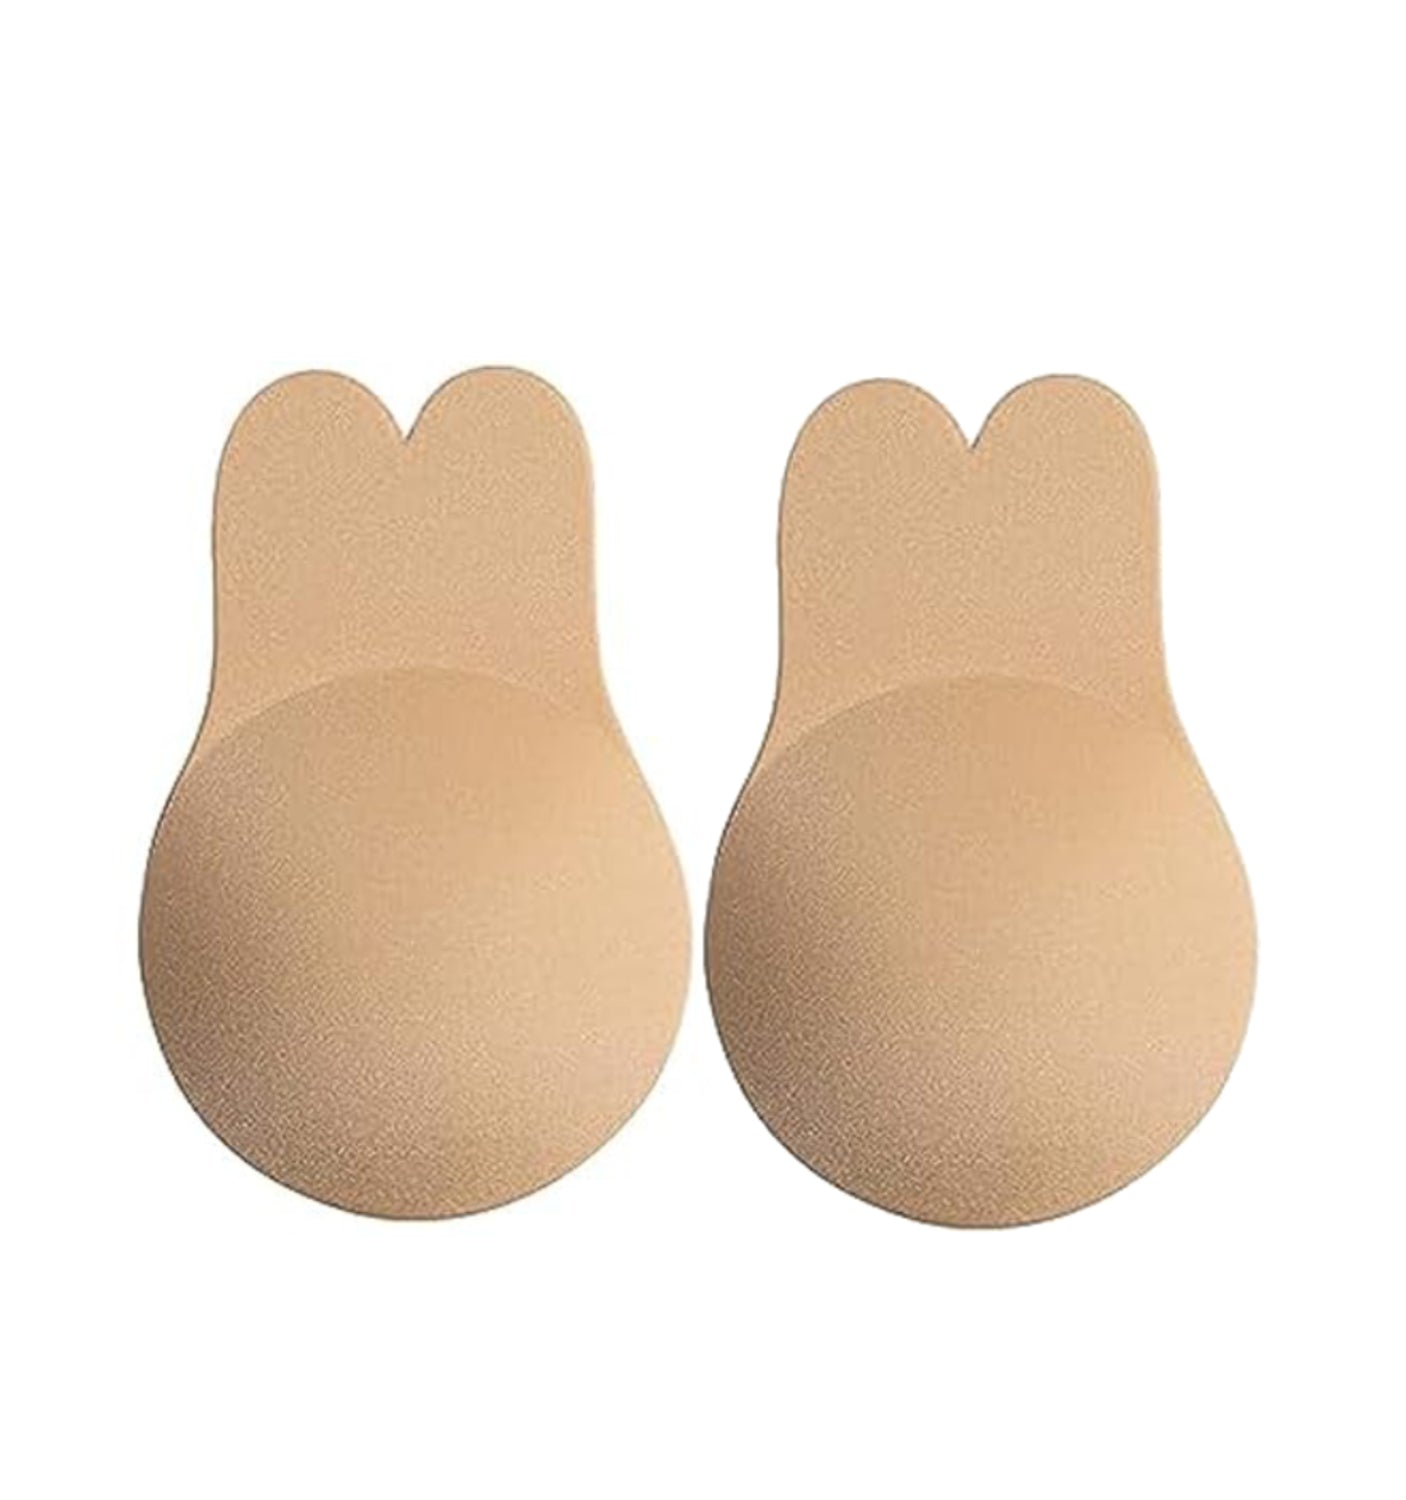 Silicone Push-Up Nipple Covers Reusable Sticky Bra Invisible Tape Lift Up Strapless Bra for Women (Beige)